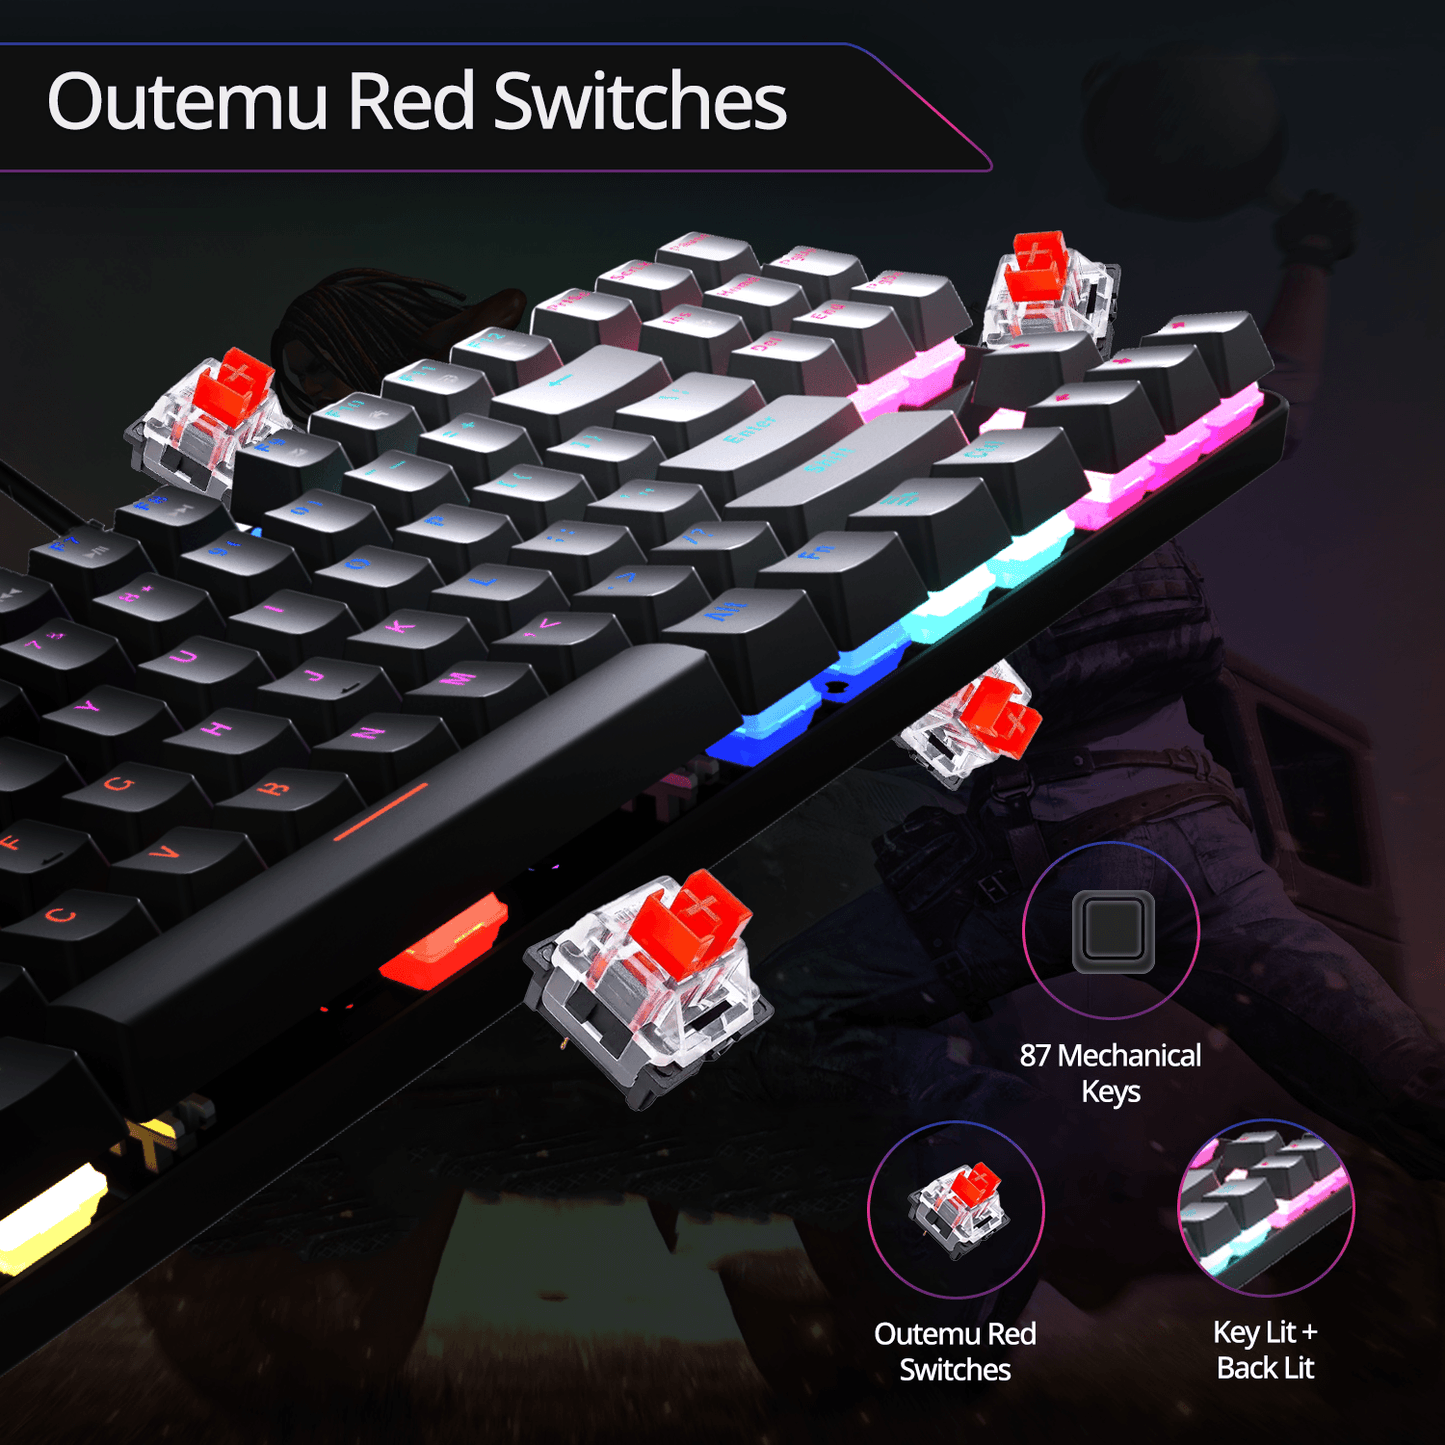 K12 Orion 2.0 TKL Mechanical Gaming Keyboard, True Red Outemu Switches